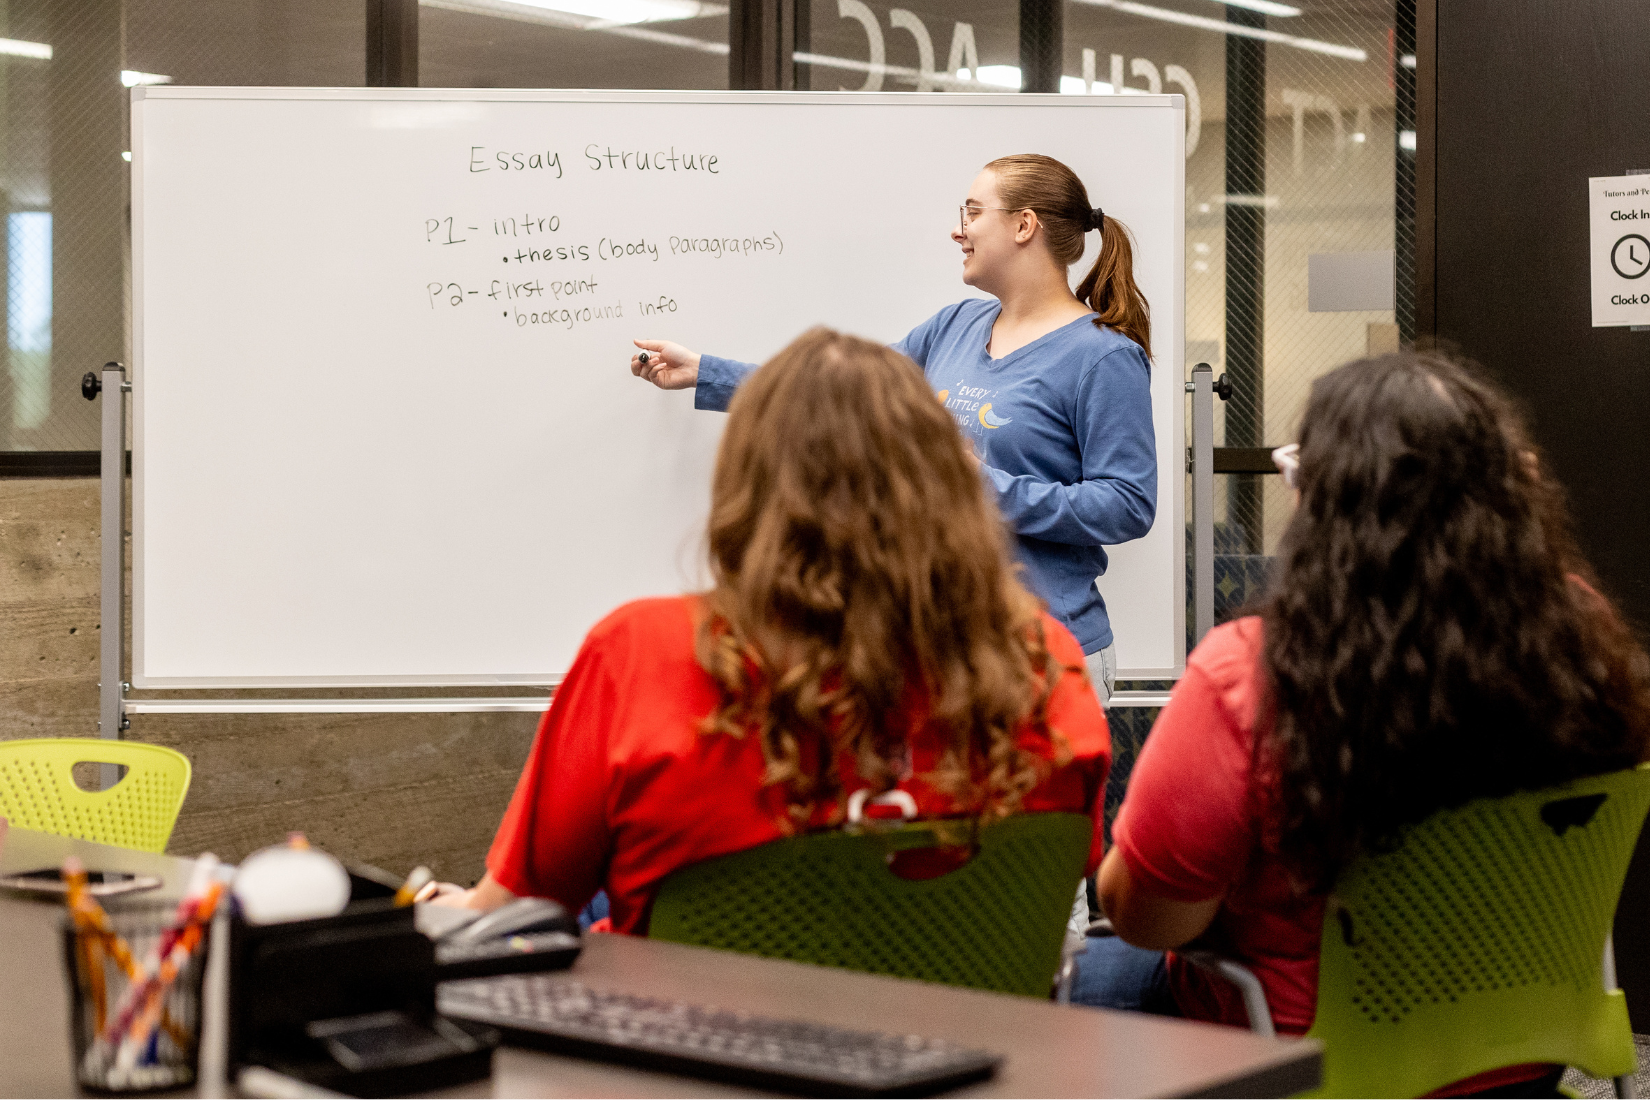 A student in front of a whiteboard presenting information to other students